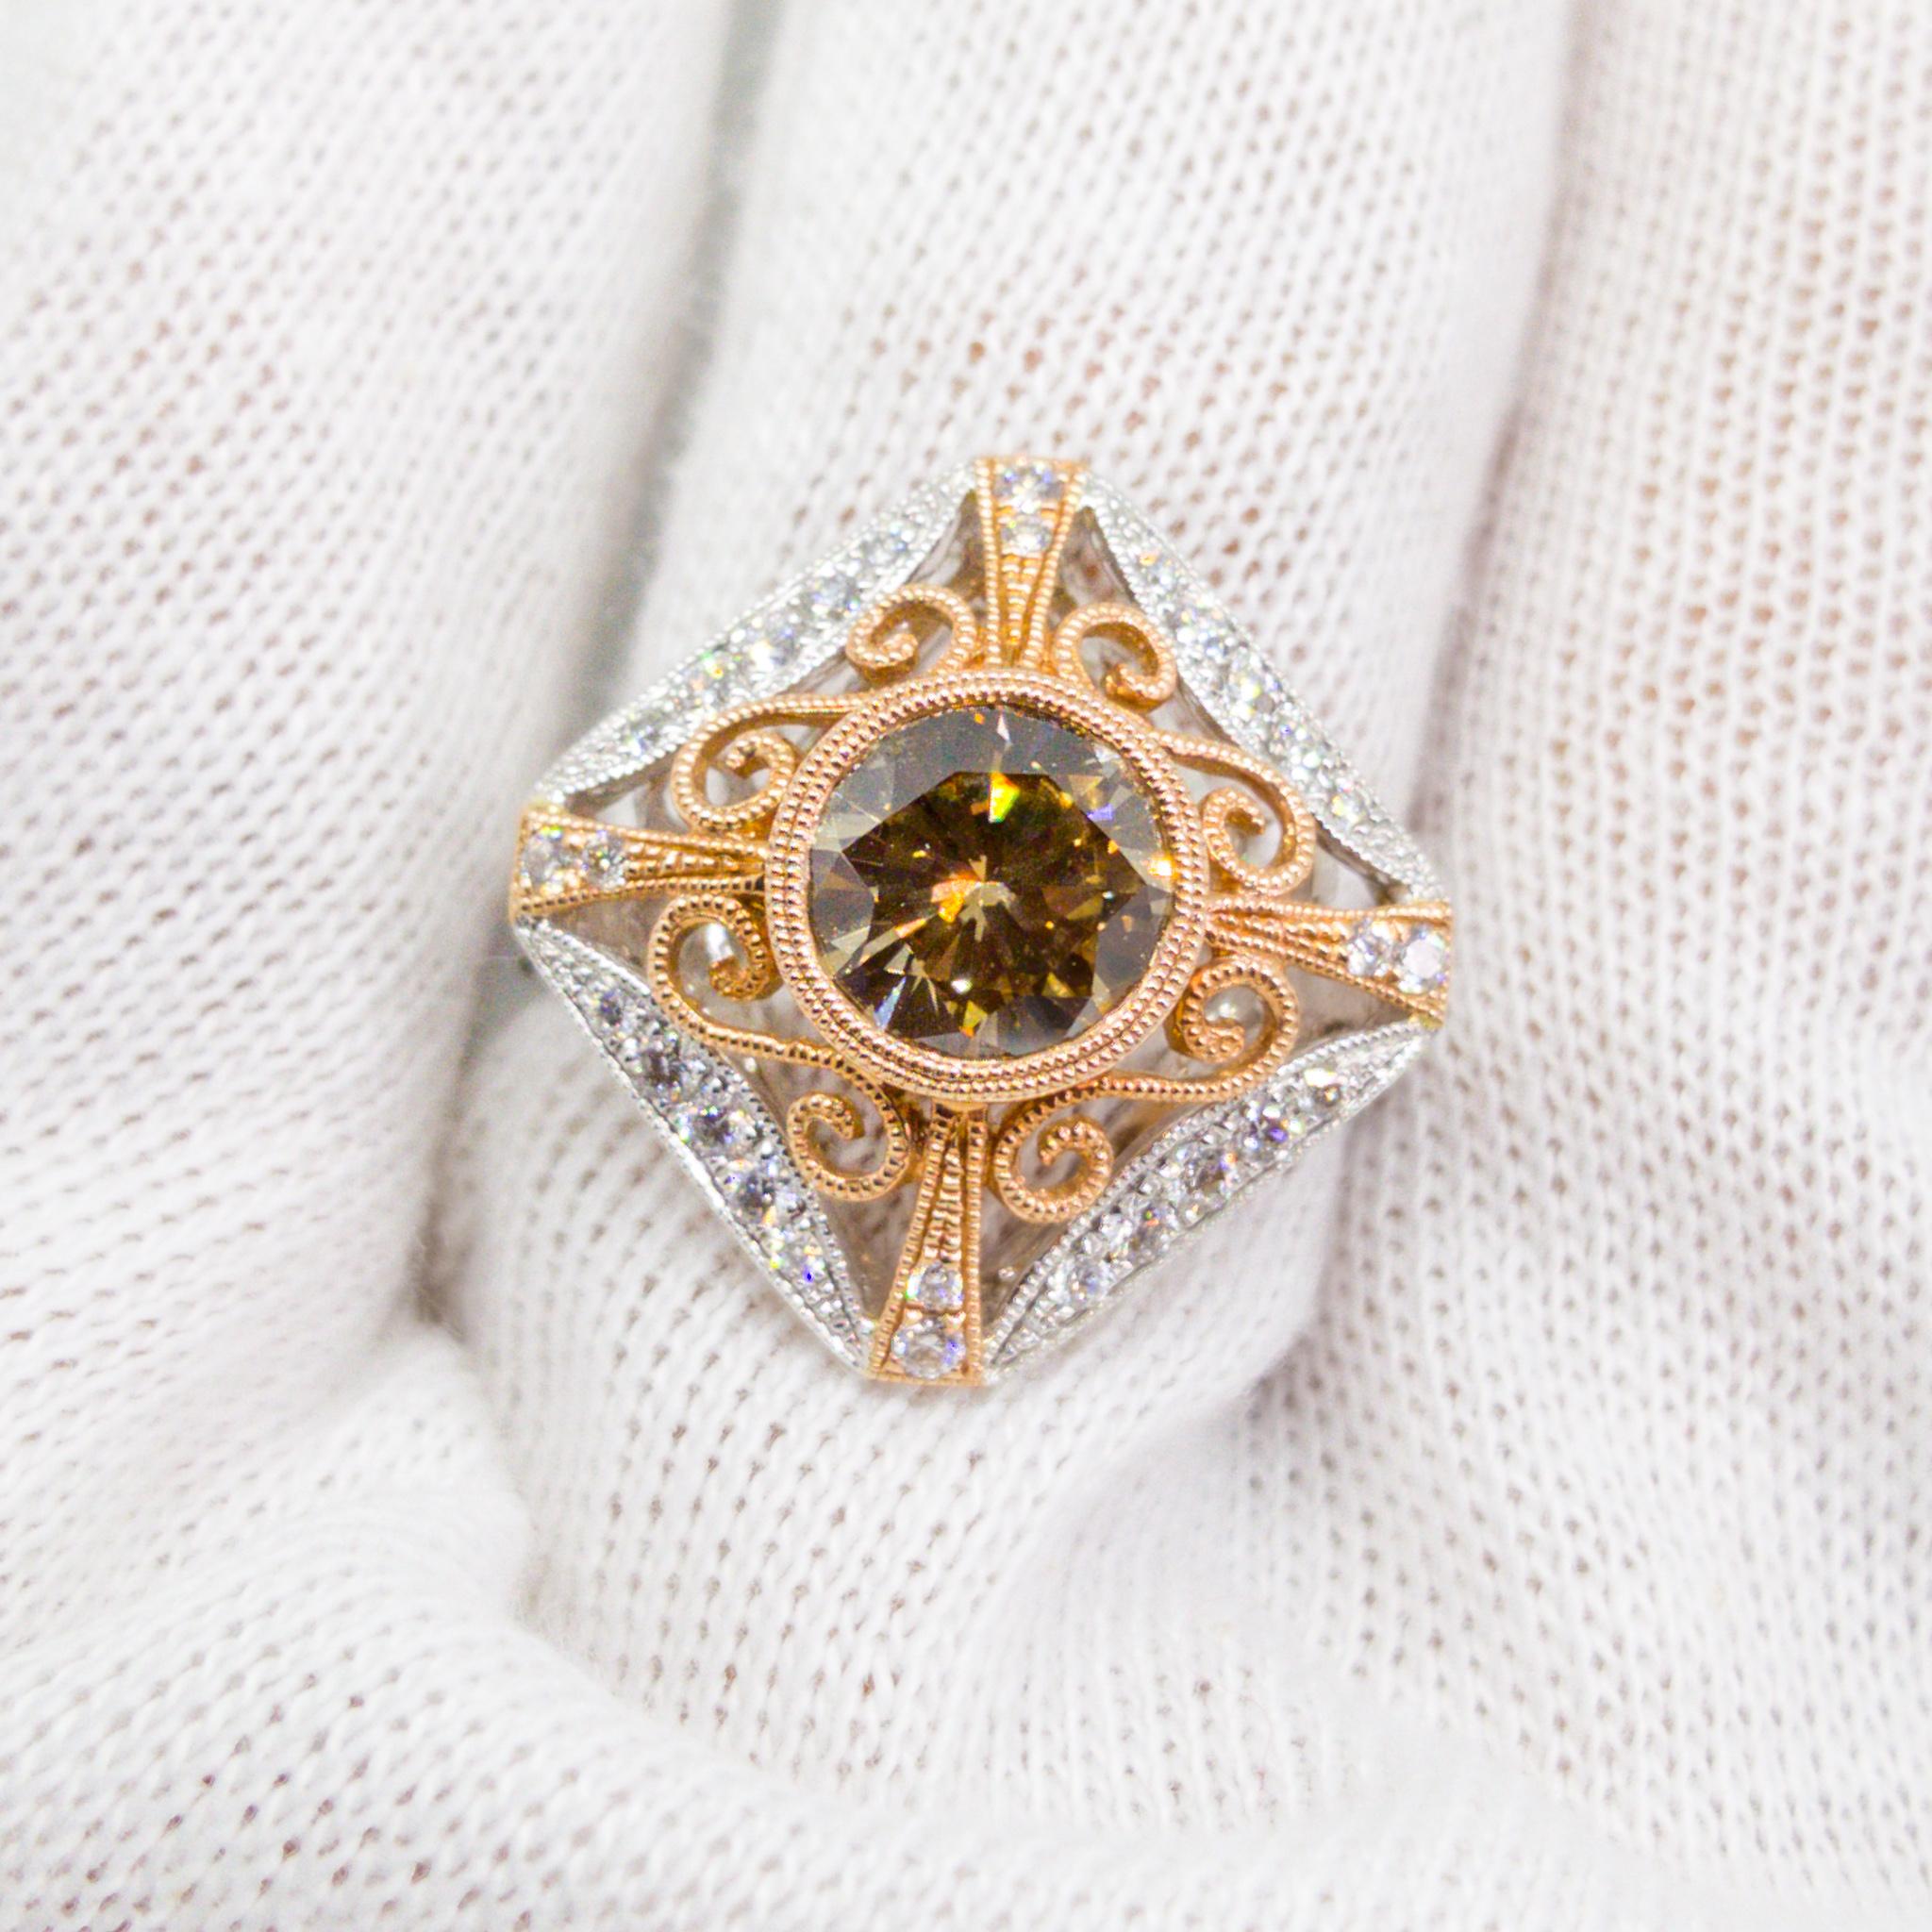 Natural Fancy Champagne Diamond Ring 2.26 Carat Filigree White and Rose Gold For Sale 8